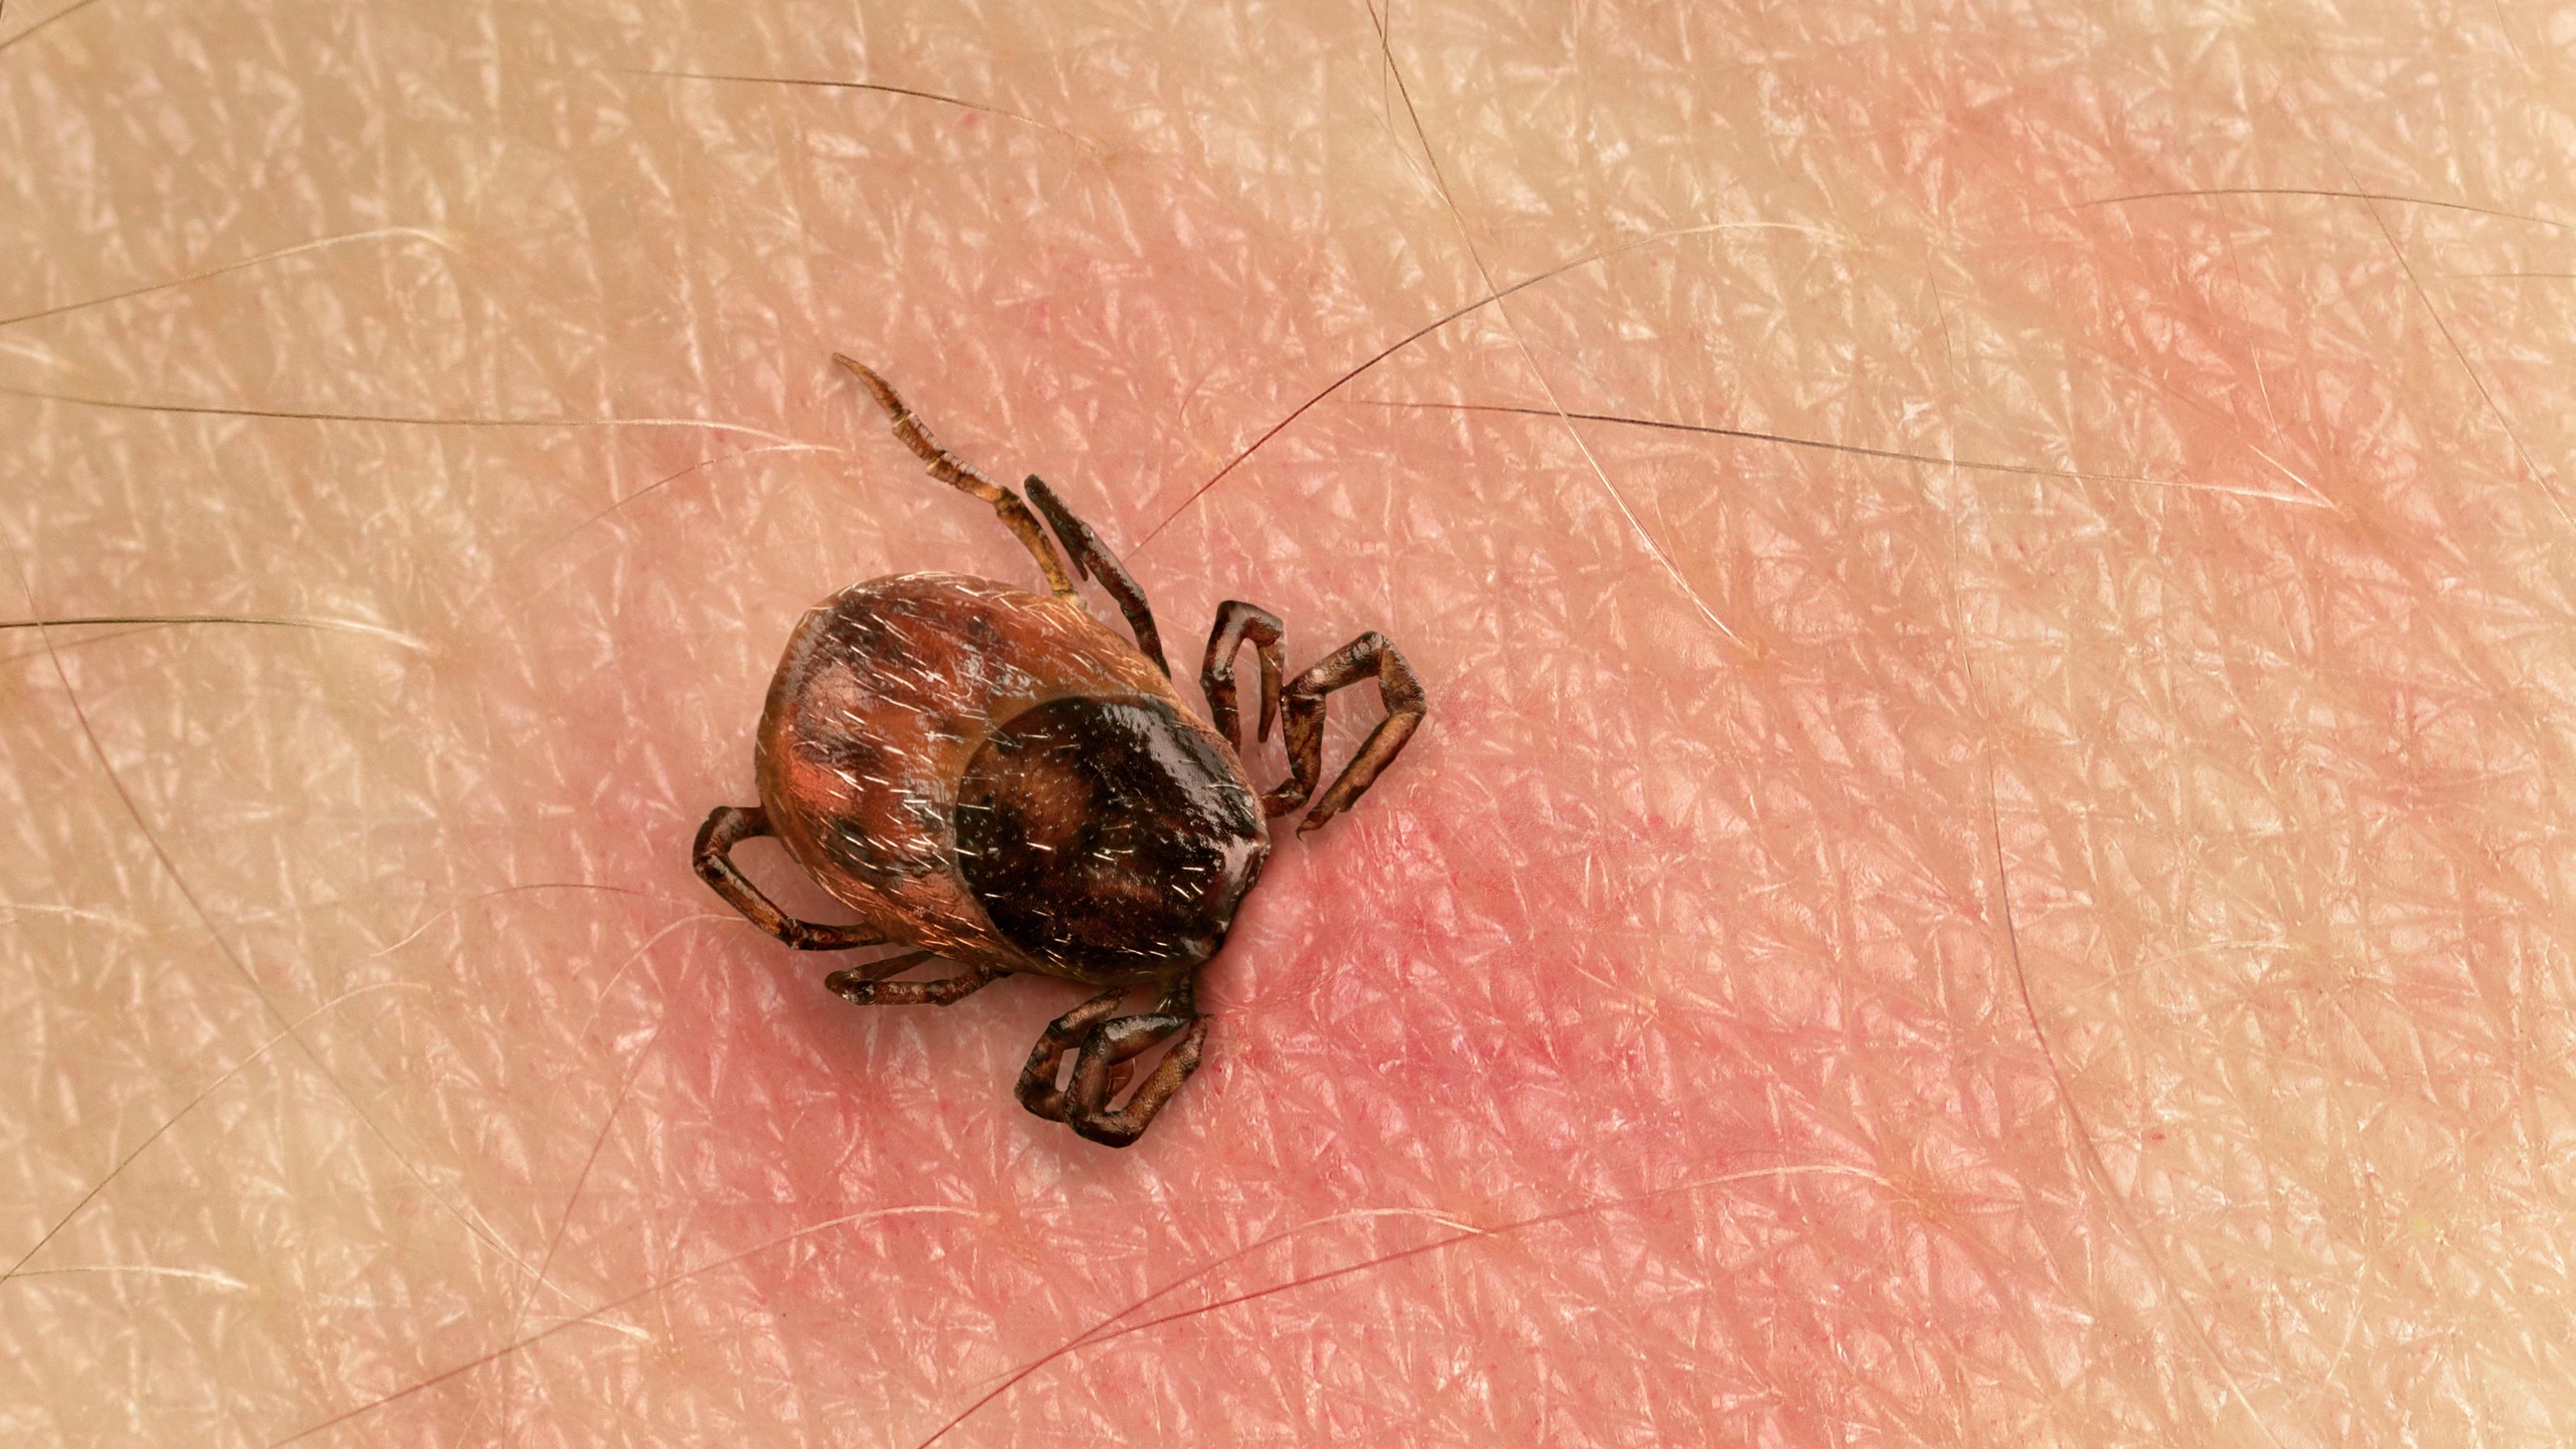 Tick Bite Pictures & Symptoms - What Does a Tick Bite Look Like?